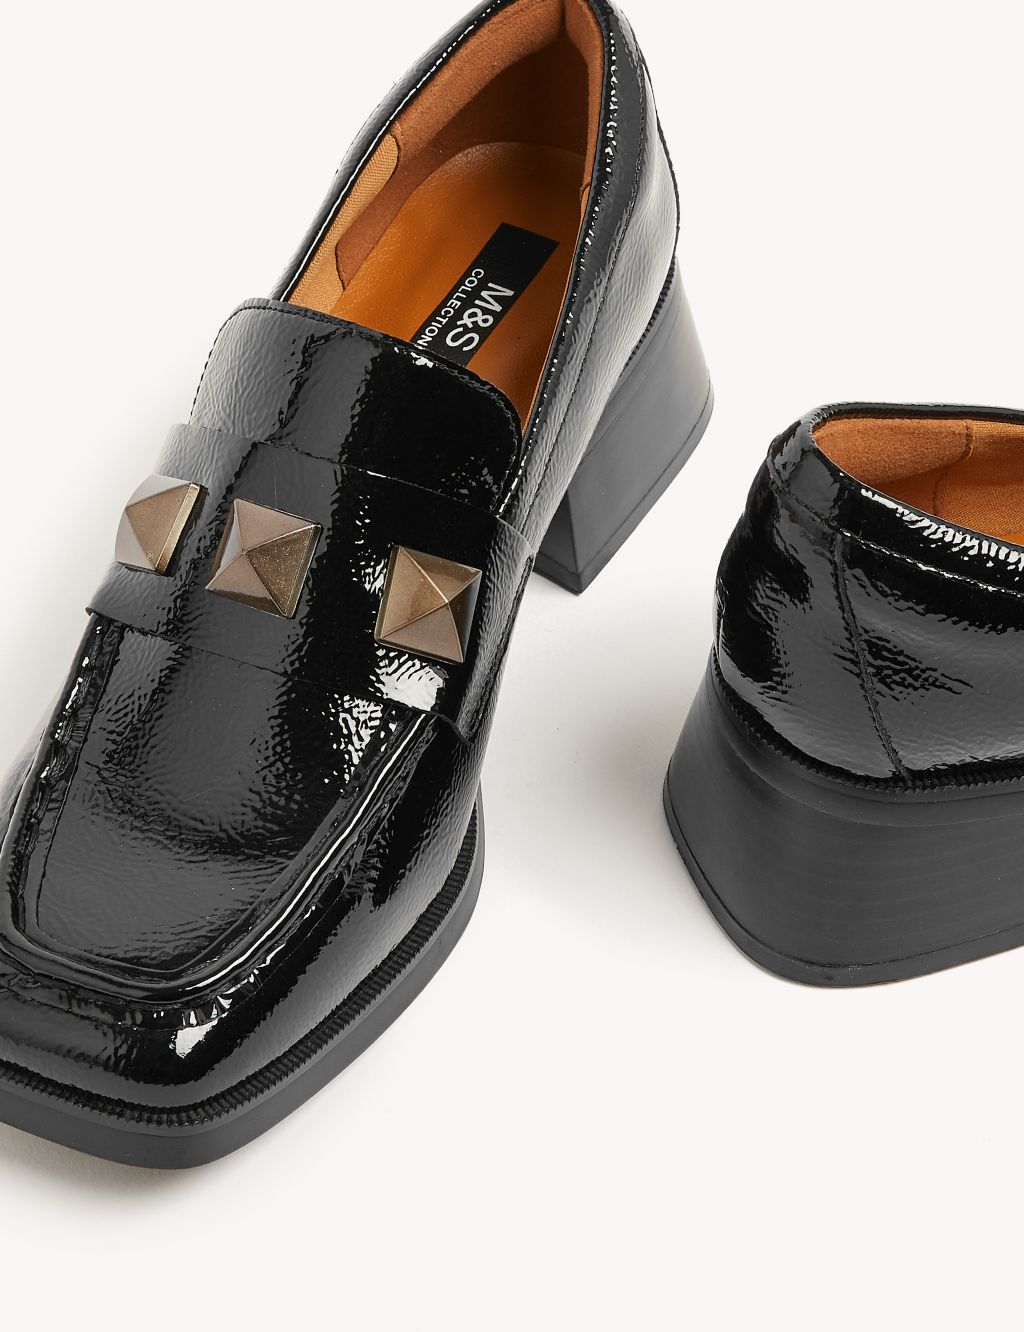 Wide Fit Leather Patent Block Heel Loafers image 2